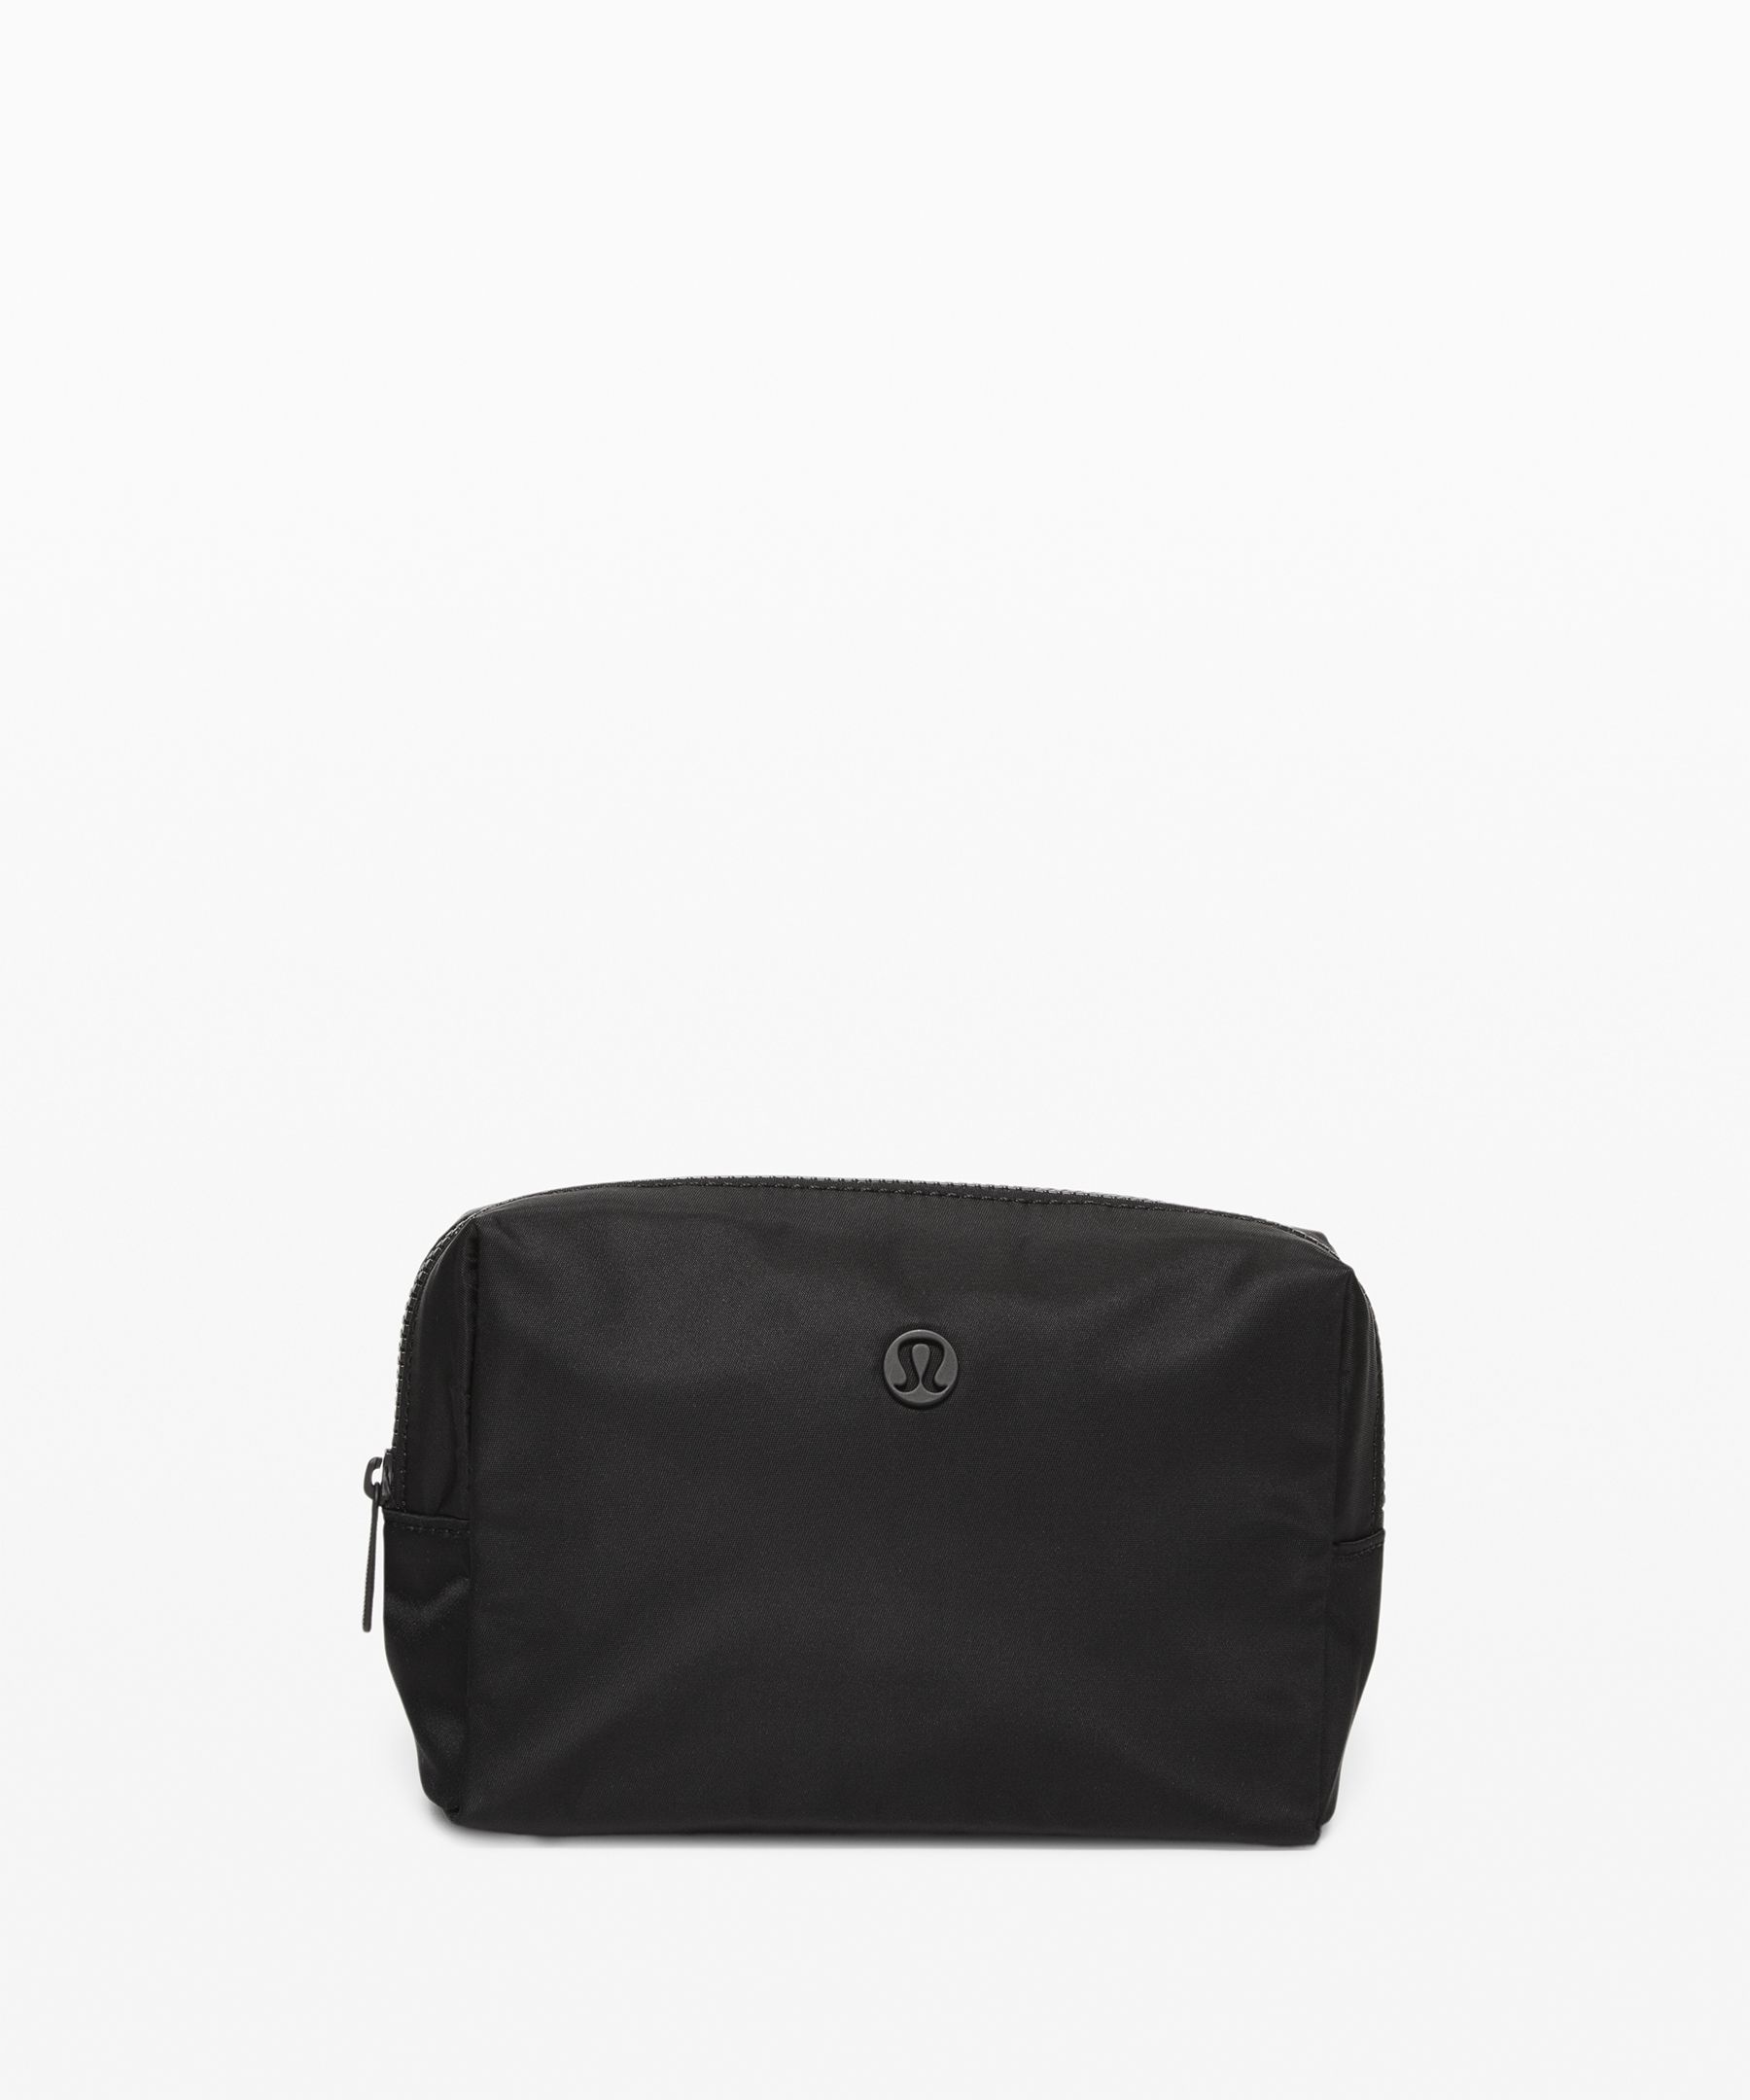 lululemon all your small things pouch